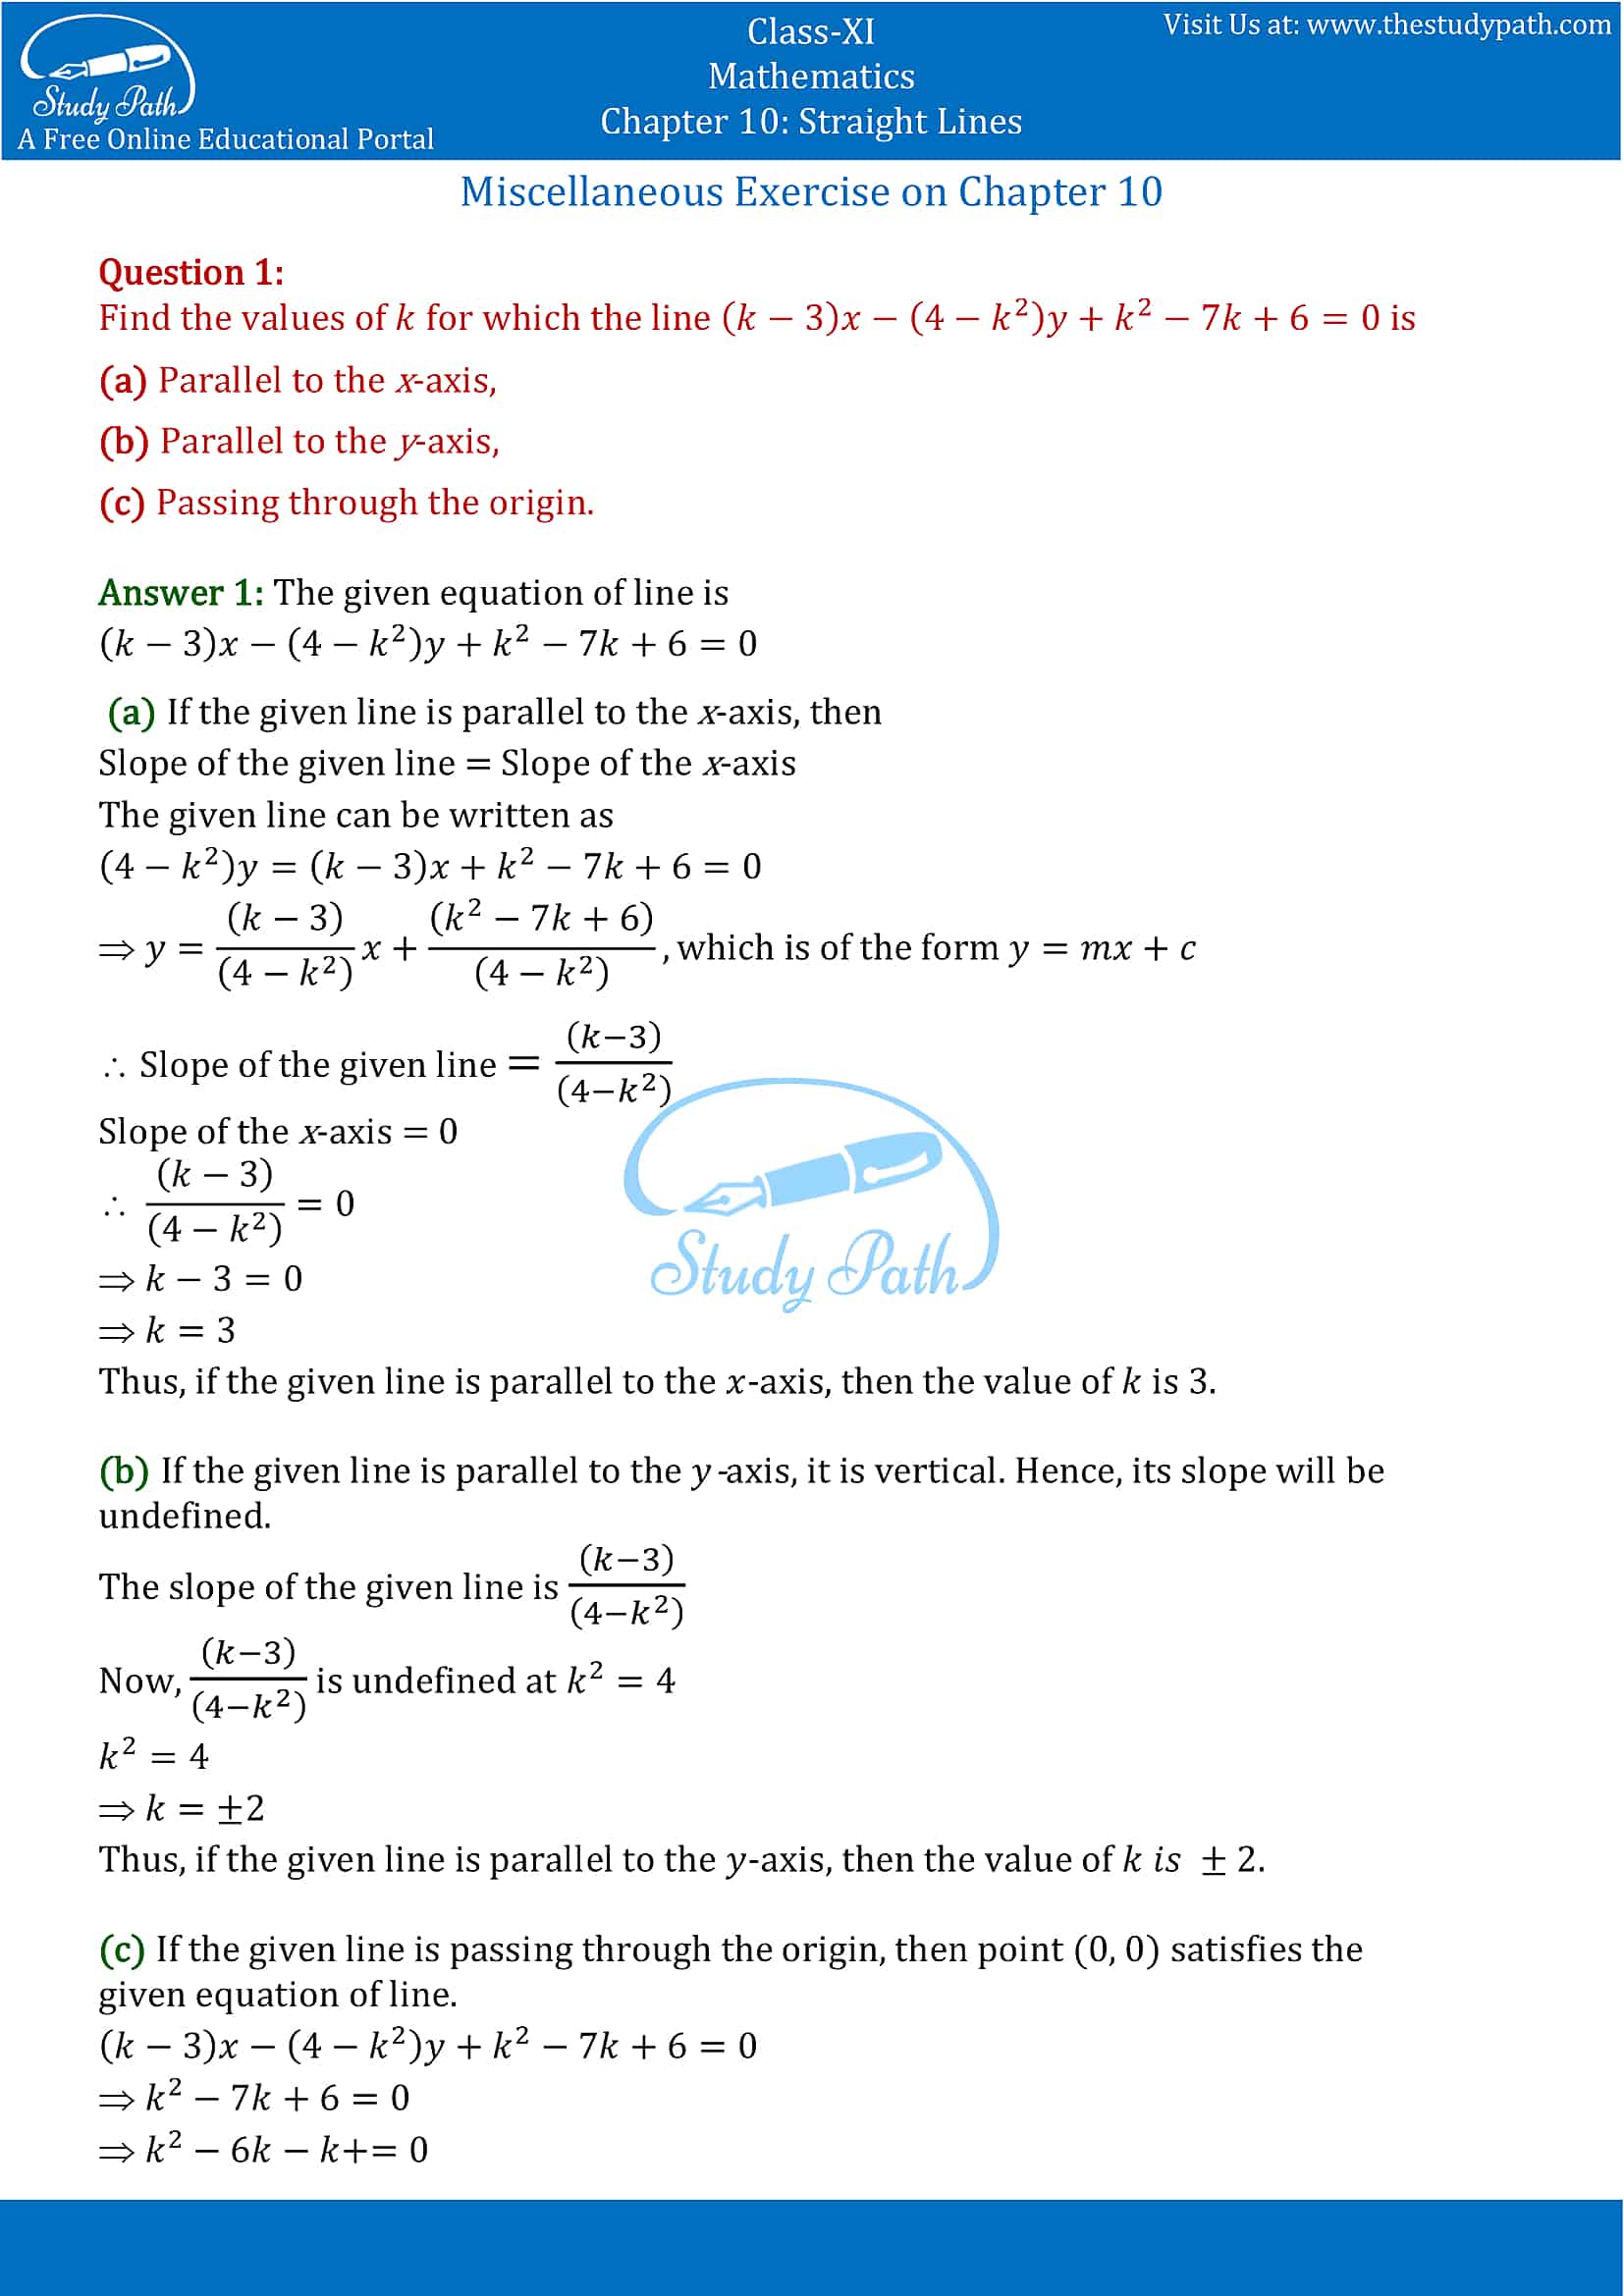 NCERT Solutions for Class 11 Maths chapter 10 Straight Lines Miscellaneous Exercise Part-1